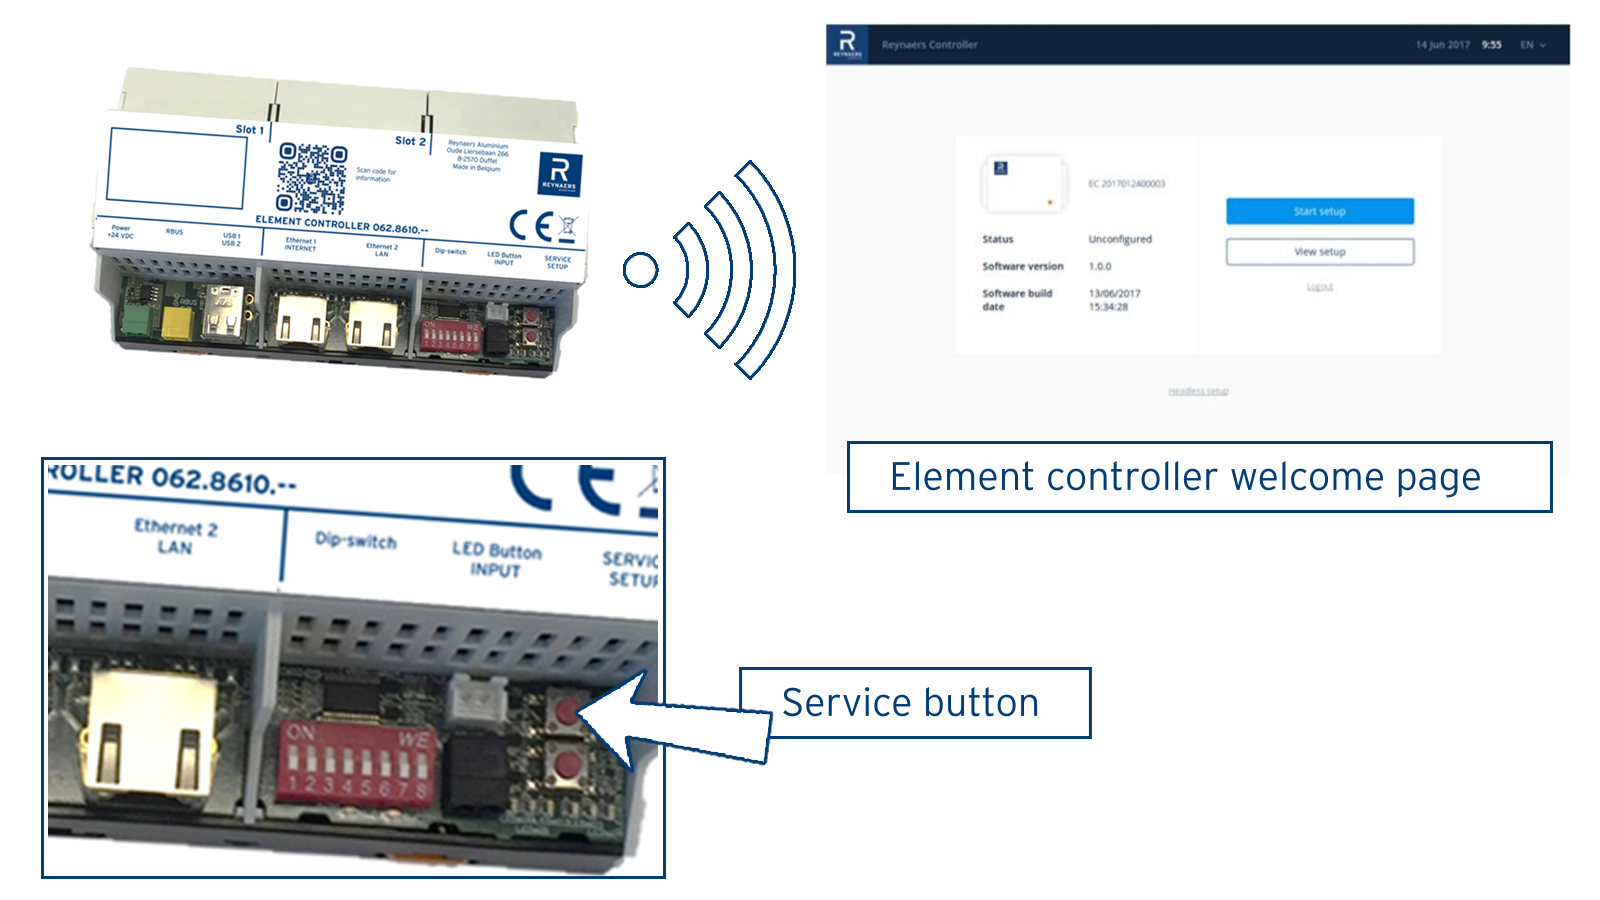 Element controller welcome page.